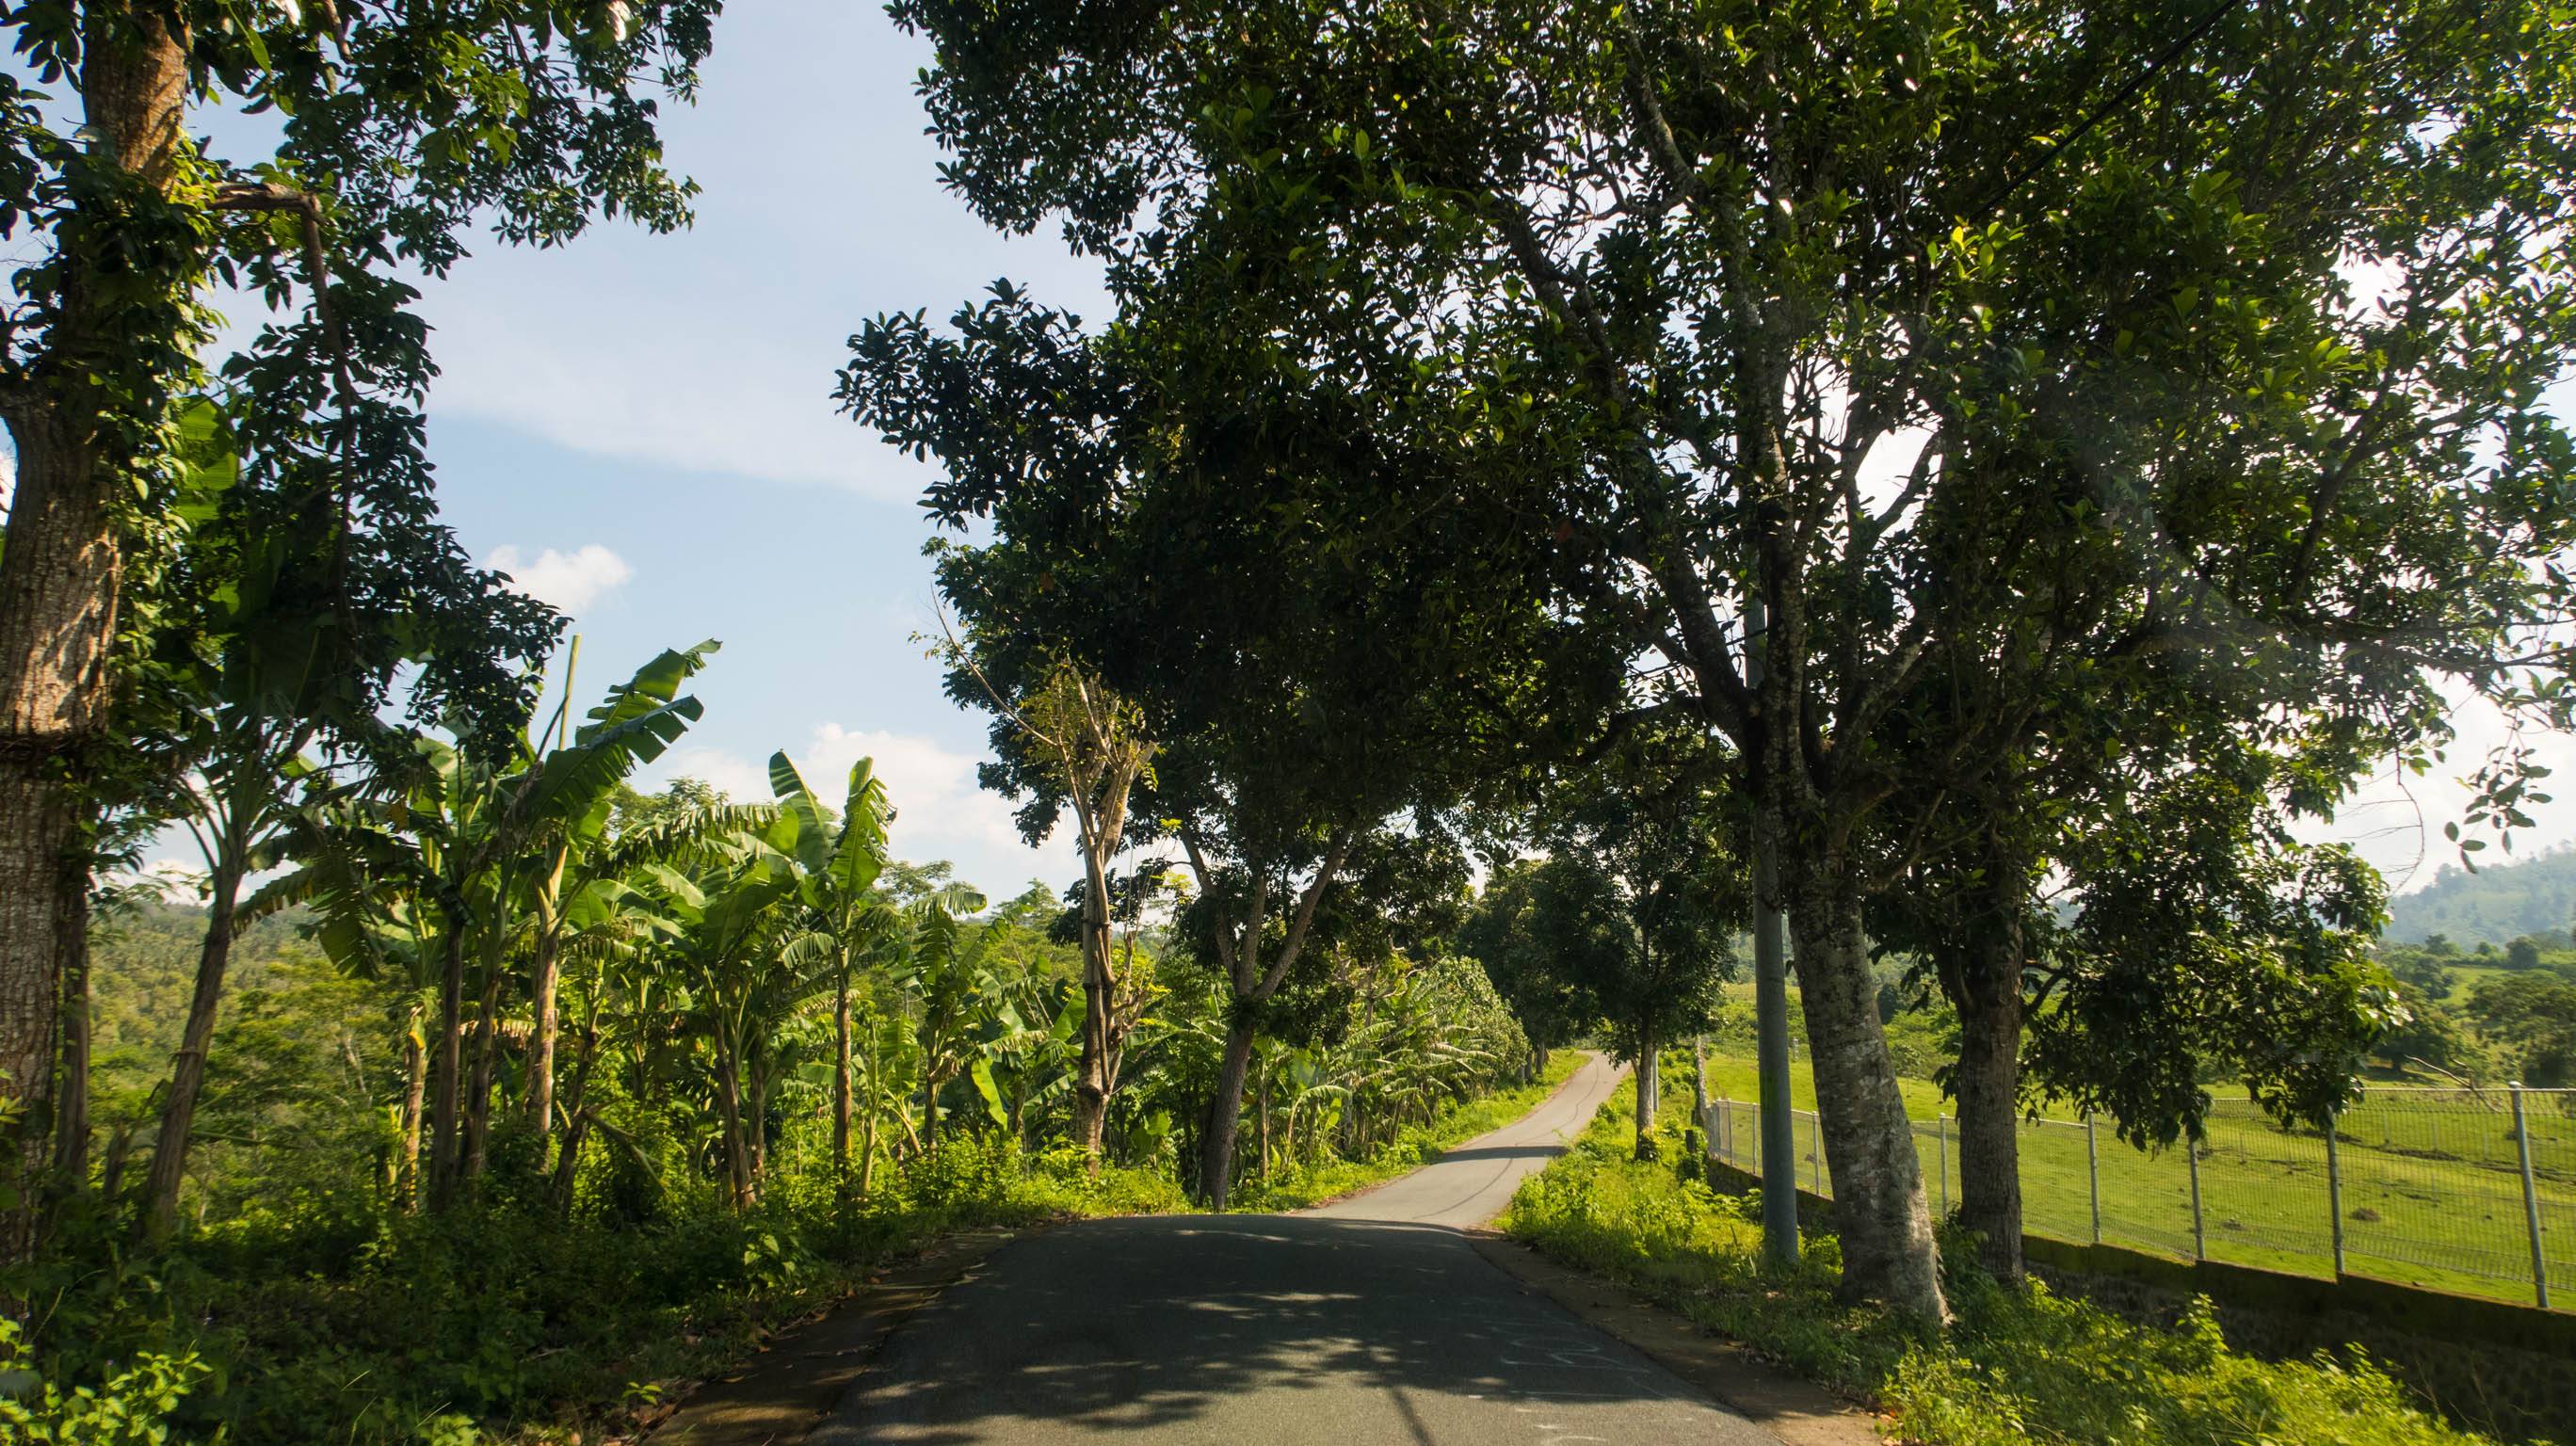 The road was narrow with banana trees farm and grass field on each side.